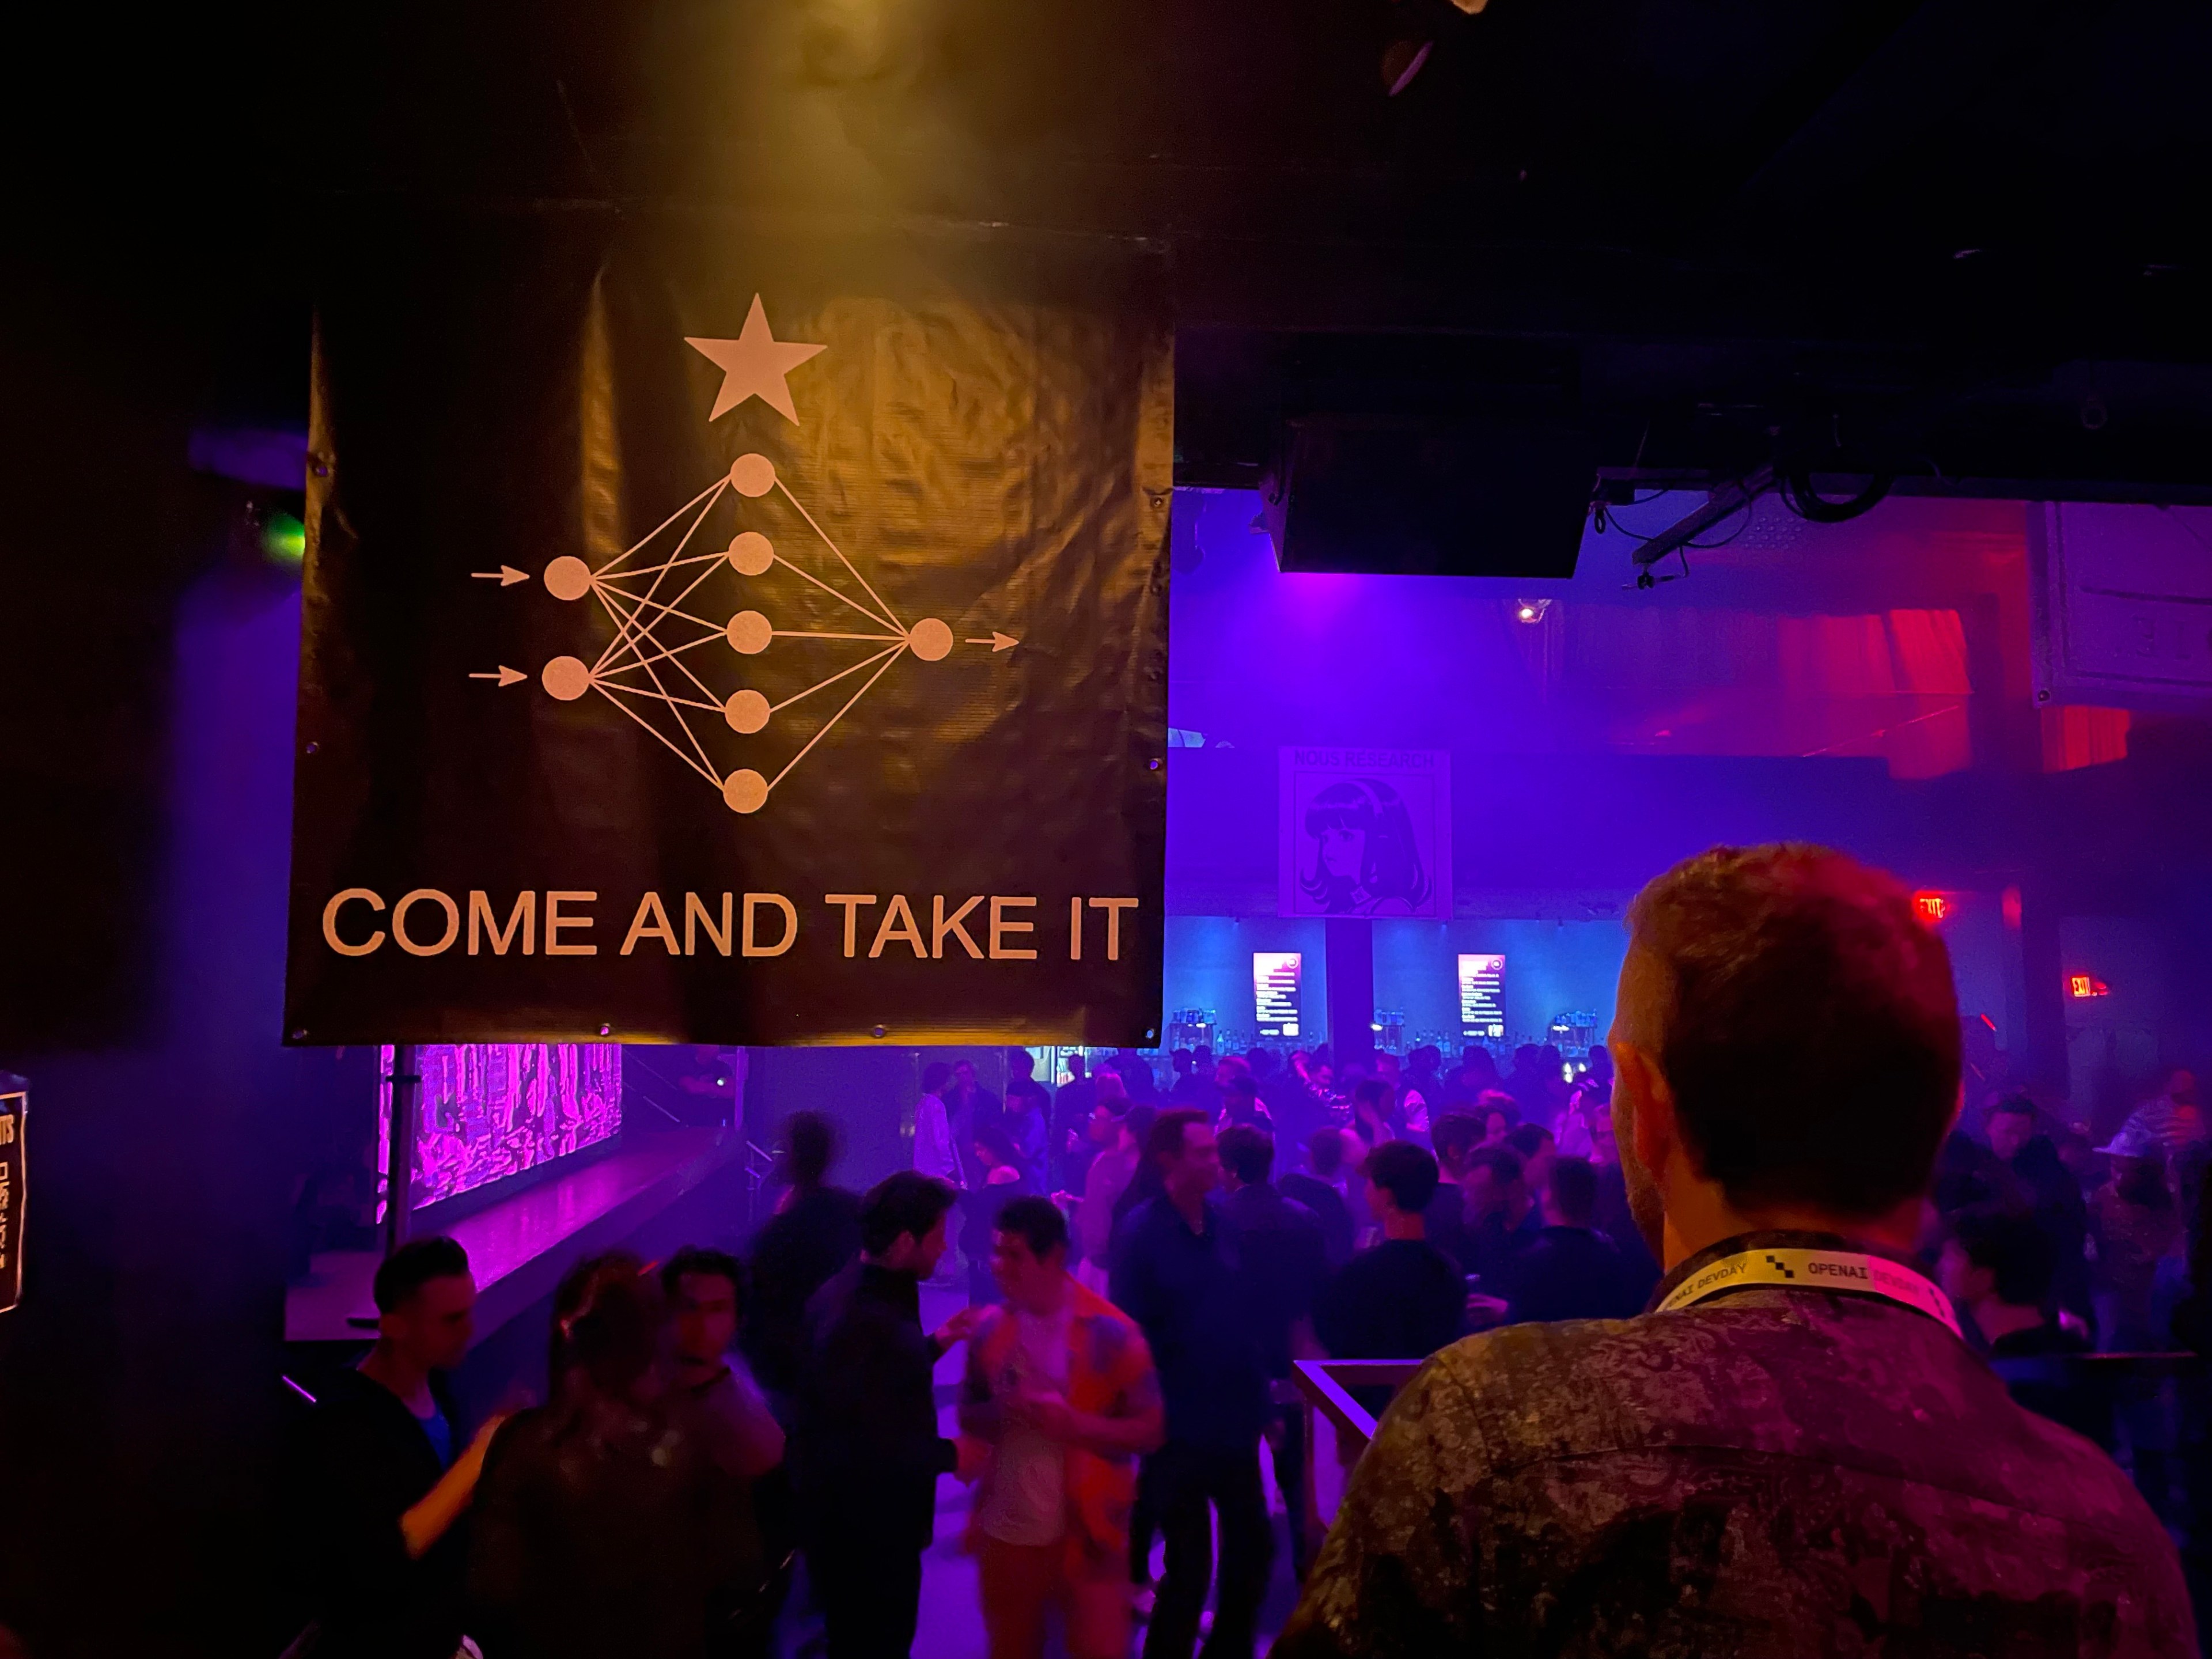 A person stands in the foreground to the right of a black poster reading "come and take it" next to an image with a series of dots connected with lines forming the web—a depiction of a "neural net" used by AI algorithms. Behind the poster is a crowd of people near a stage at a nightclub bathed in blue and purple light.